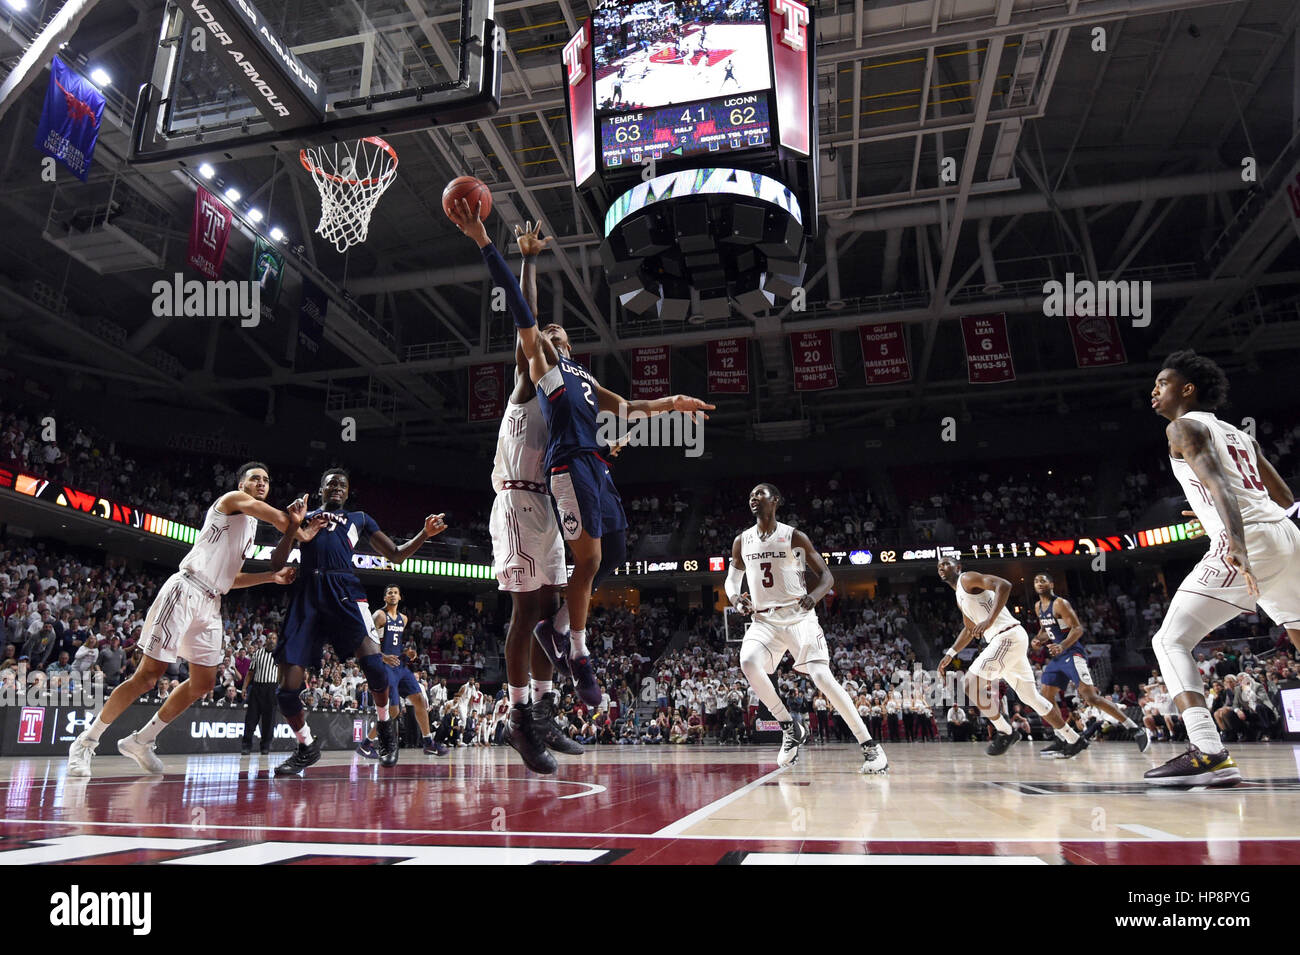 Philadelphia, Pennsylvania, USA. 19th Feb, 2017. Connecticut Huskies guard JALEN ADAMS (2) puts up what would be the game winning shot over Temple Owls center ERNEST AFLAKPUI (24) during the American Athletic Conference basketball game being played at the Liacouras Center in Philadelphia. UConn came back to beat Temple 64-63. Credit: Ken Inness/ZUMA Wire/Alamy Live News Stock Photo